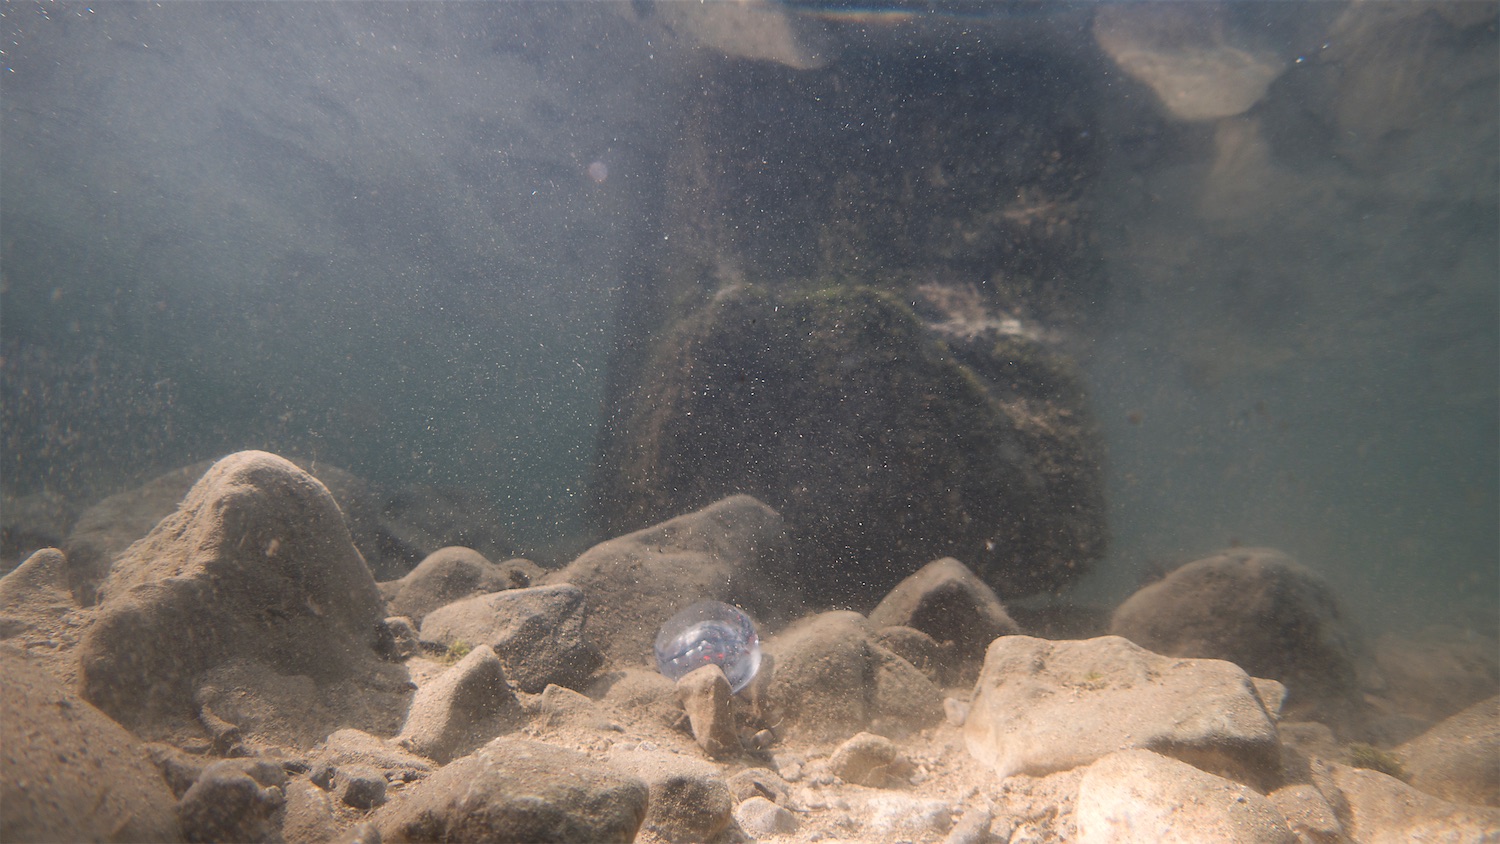 A landscape underwater photograph with muddy browns, sandy yellows and murky greens blues. The image is taken from just under the surface of the water where a mirrored like effect can be seen, reflecting the body of water. This can be seen at the top of the image. In the middle further at the back of this image is a dark large rock with plant matter living from it. In front of this rock and at the bottom of this photograph is an underwater floor of varied sized rocks, light and dark browns and sand colours. The rocks have curved and sharp edges, many of which look like small pyramids with smoothed out edges, laid onto the ground. The sunlight has penetrated the water and has some beams landing on this floor and onto these rocks. Catching one of these sun beams and in amongst the rocks, in the bottom middle section of this image is a small sculpture which looks like a glass disk. It has a light milk like quality to some aspects of it, although the disk does look see-through and inside of it you can see a face. It is the artists face. This glass disk is a hand made backgammon piece belonging to some of the artists other sculptural works.